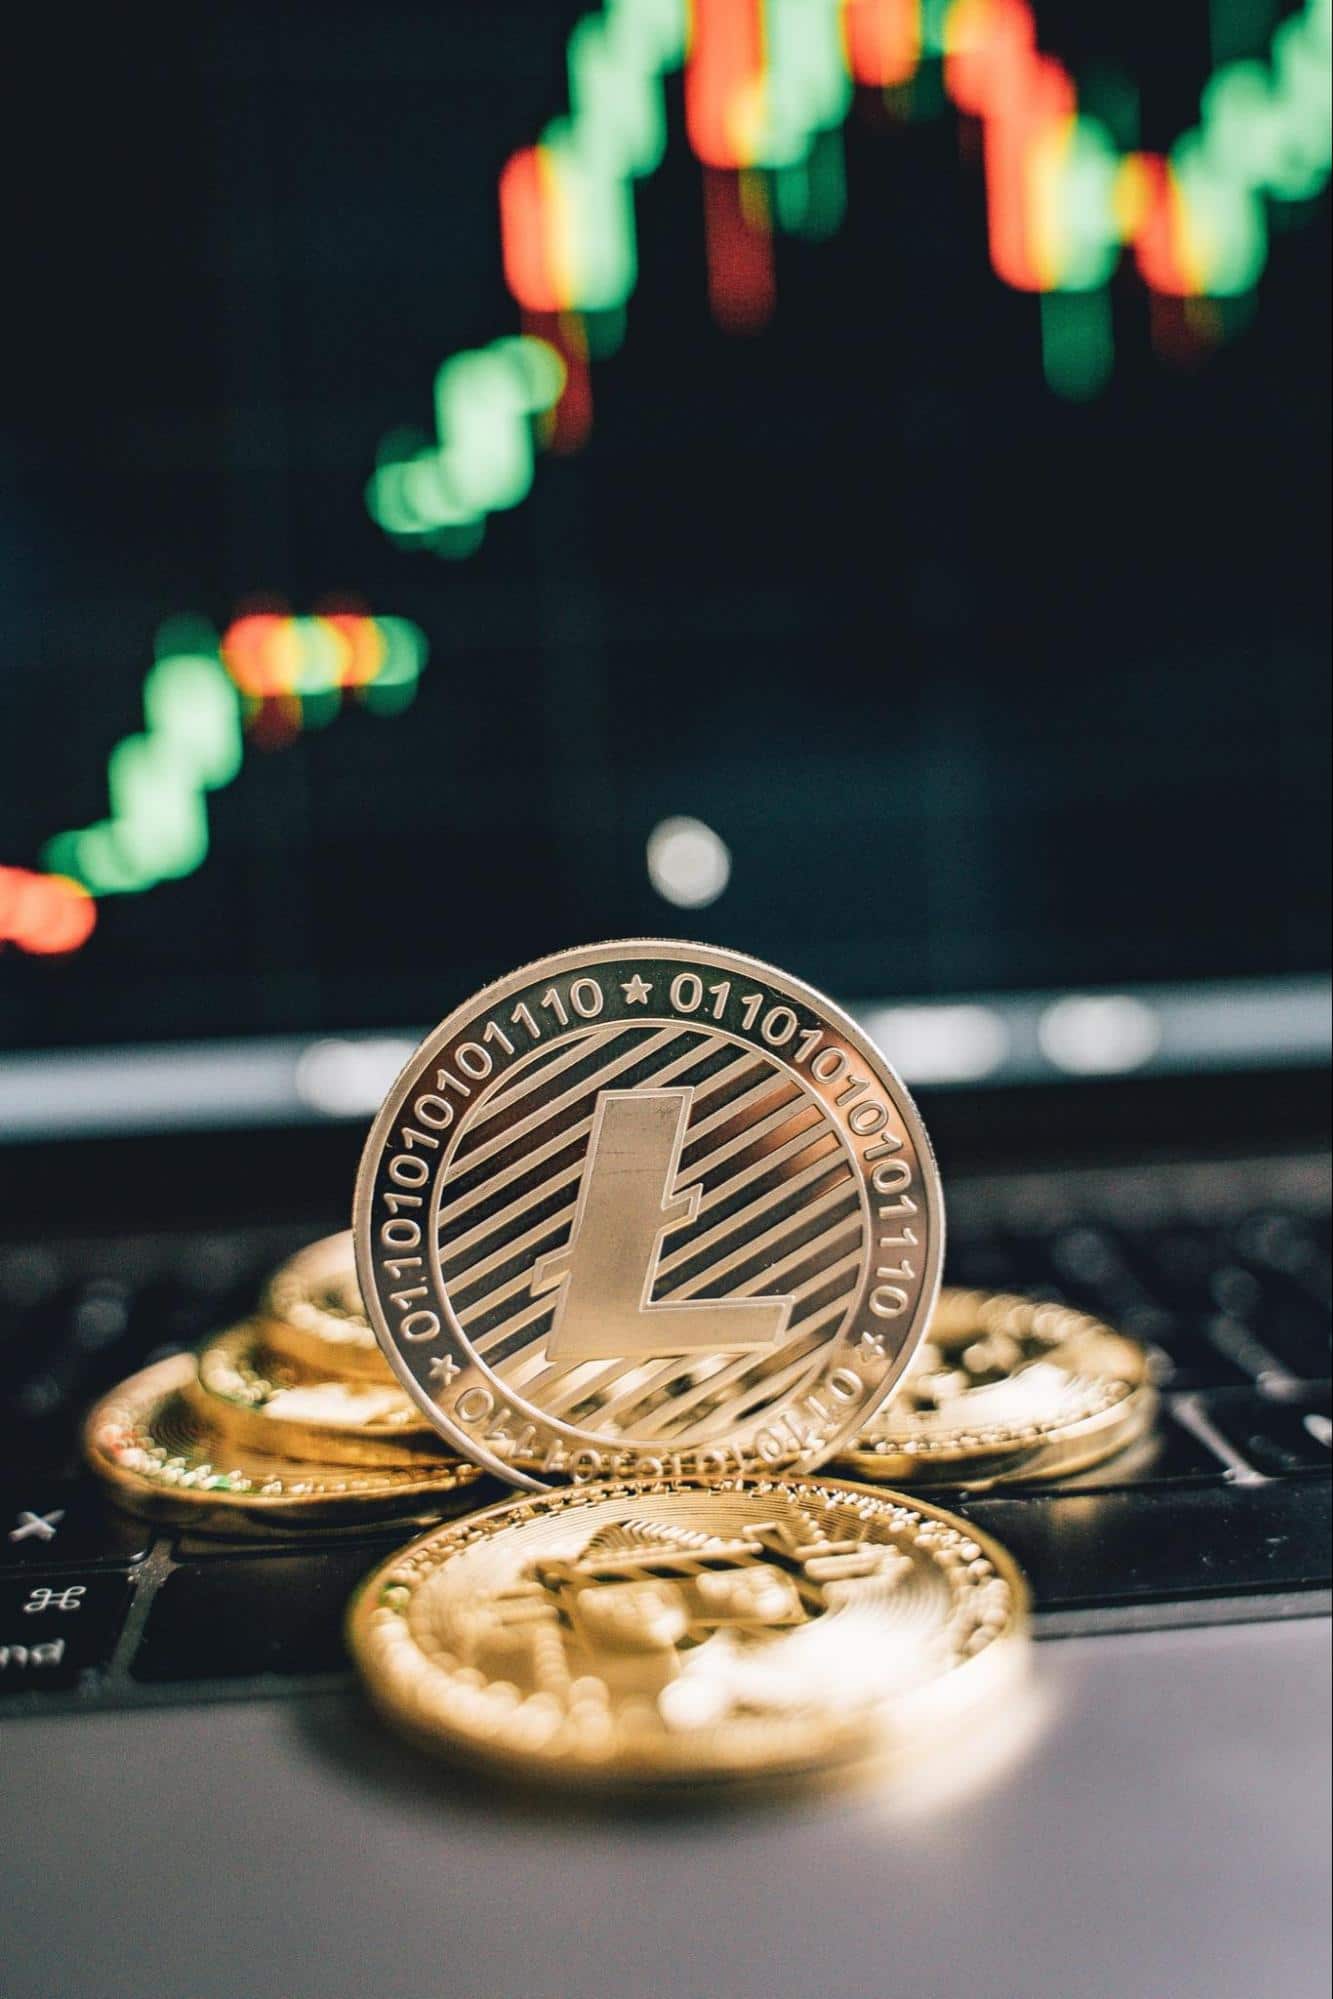 Increase Your Chances of Success with Mushe Token (XMU), Litecoin (LTC), and PAX Gold (PAXG)